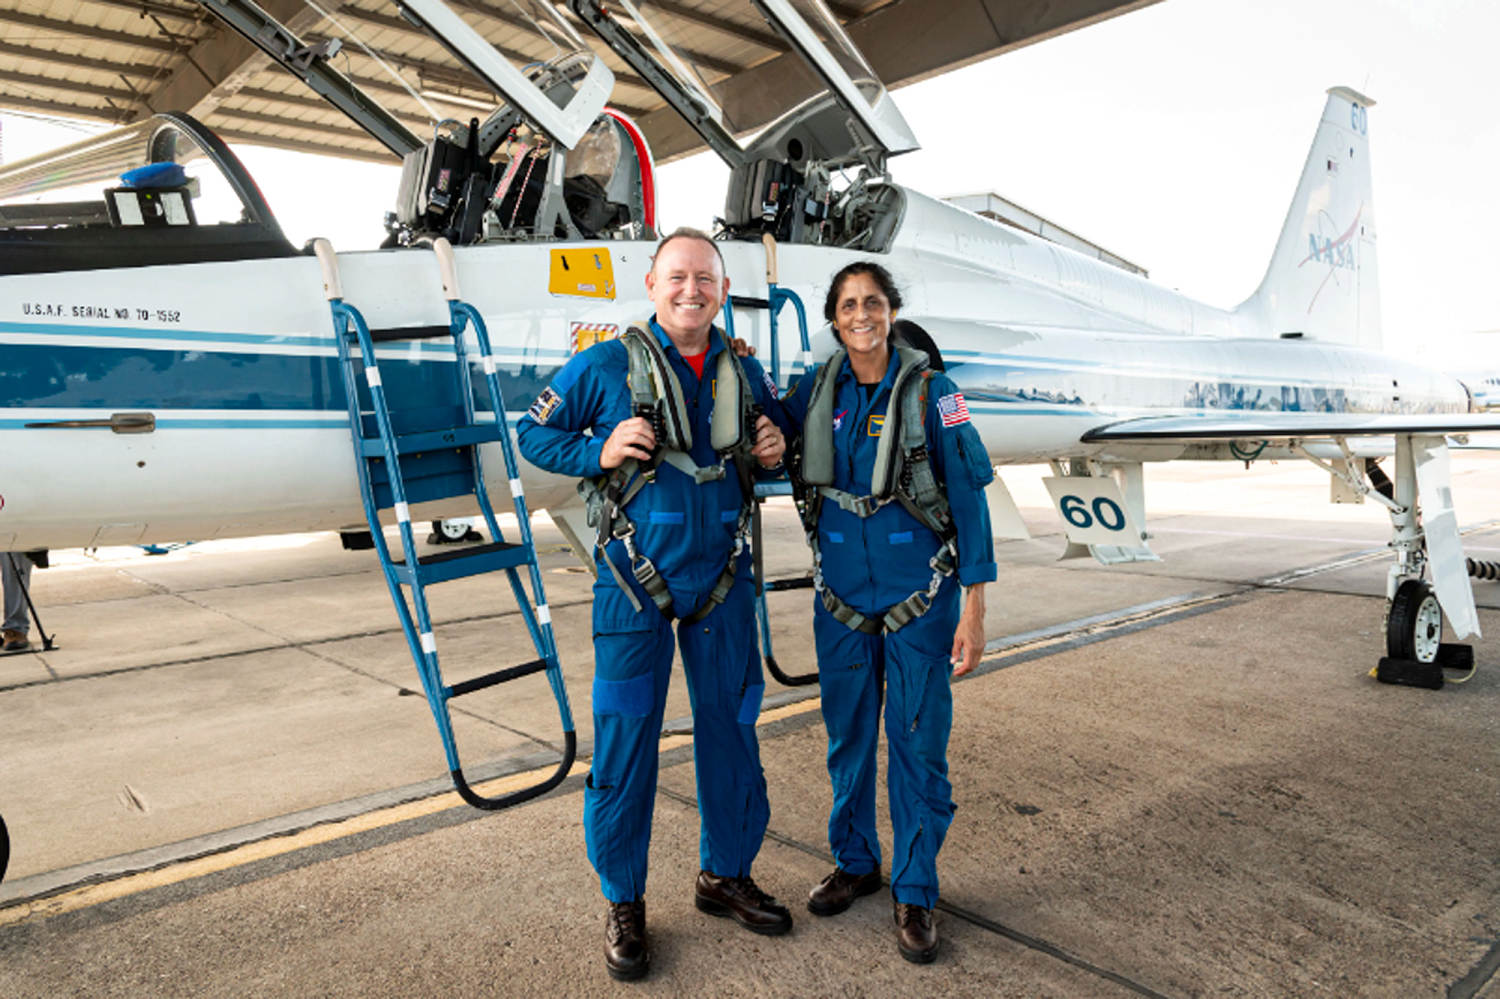 Meet the NASA astronauts who will be first to fly on Boeing’s Starliner spaceship